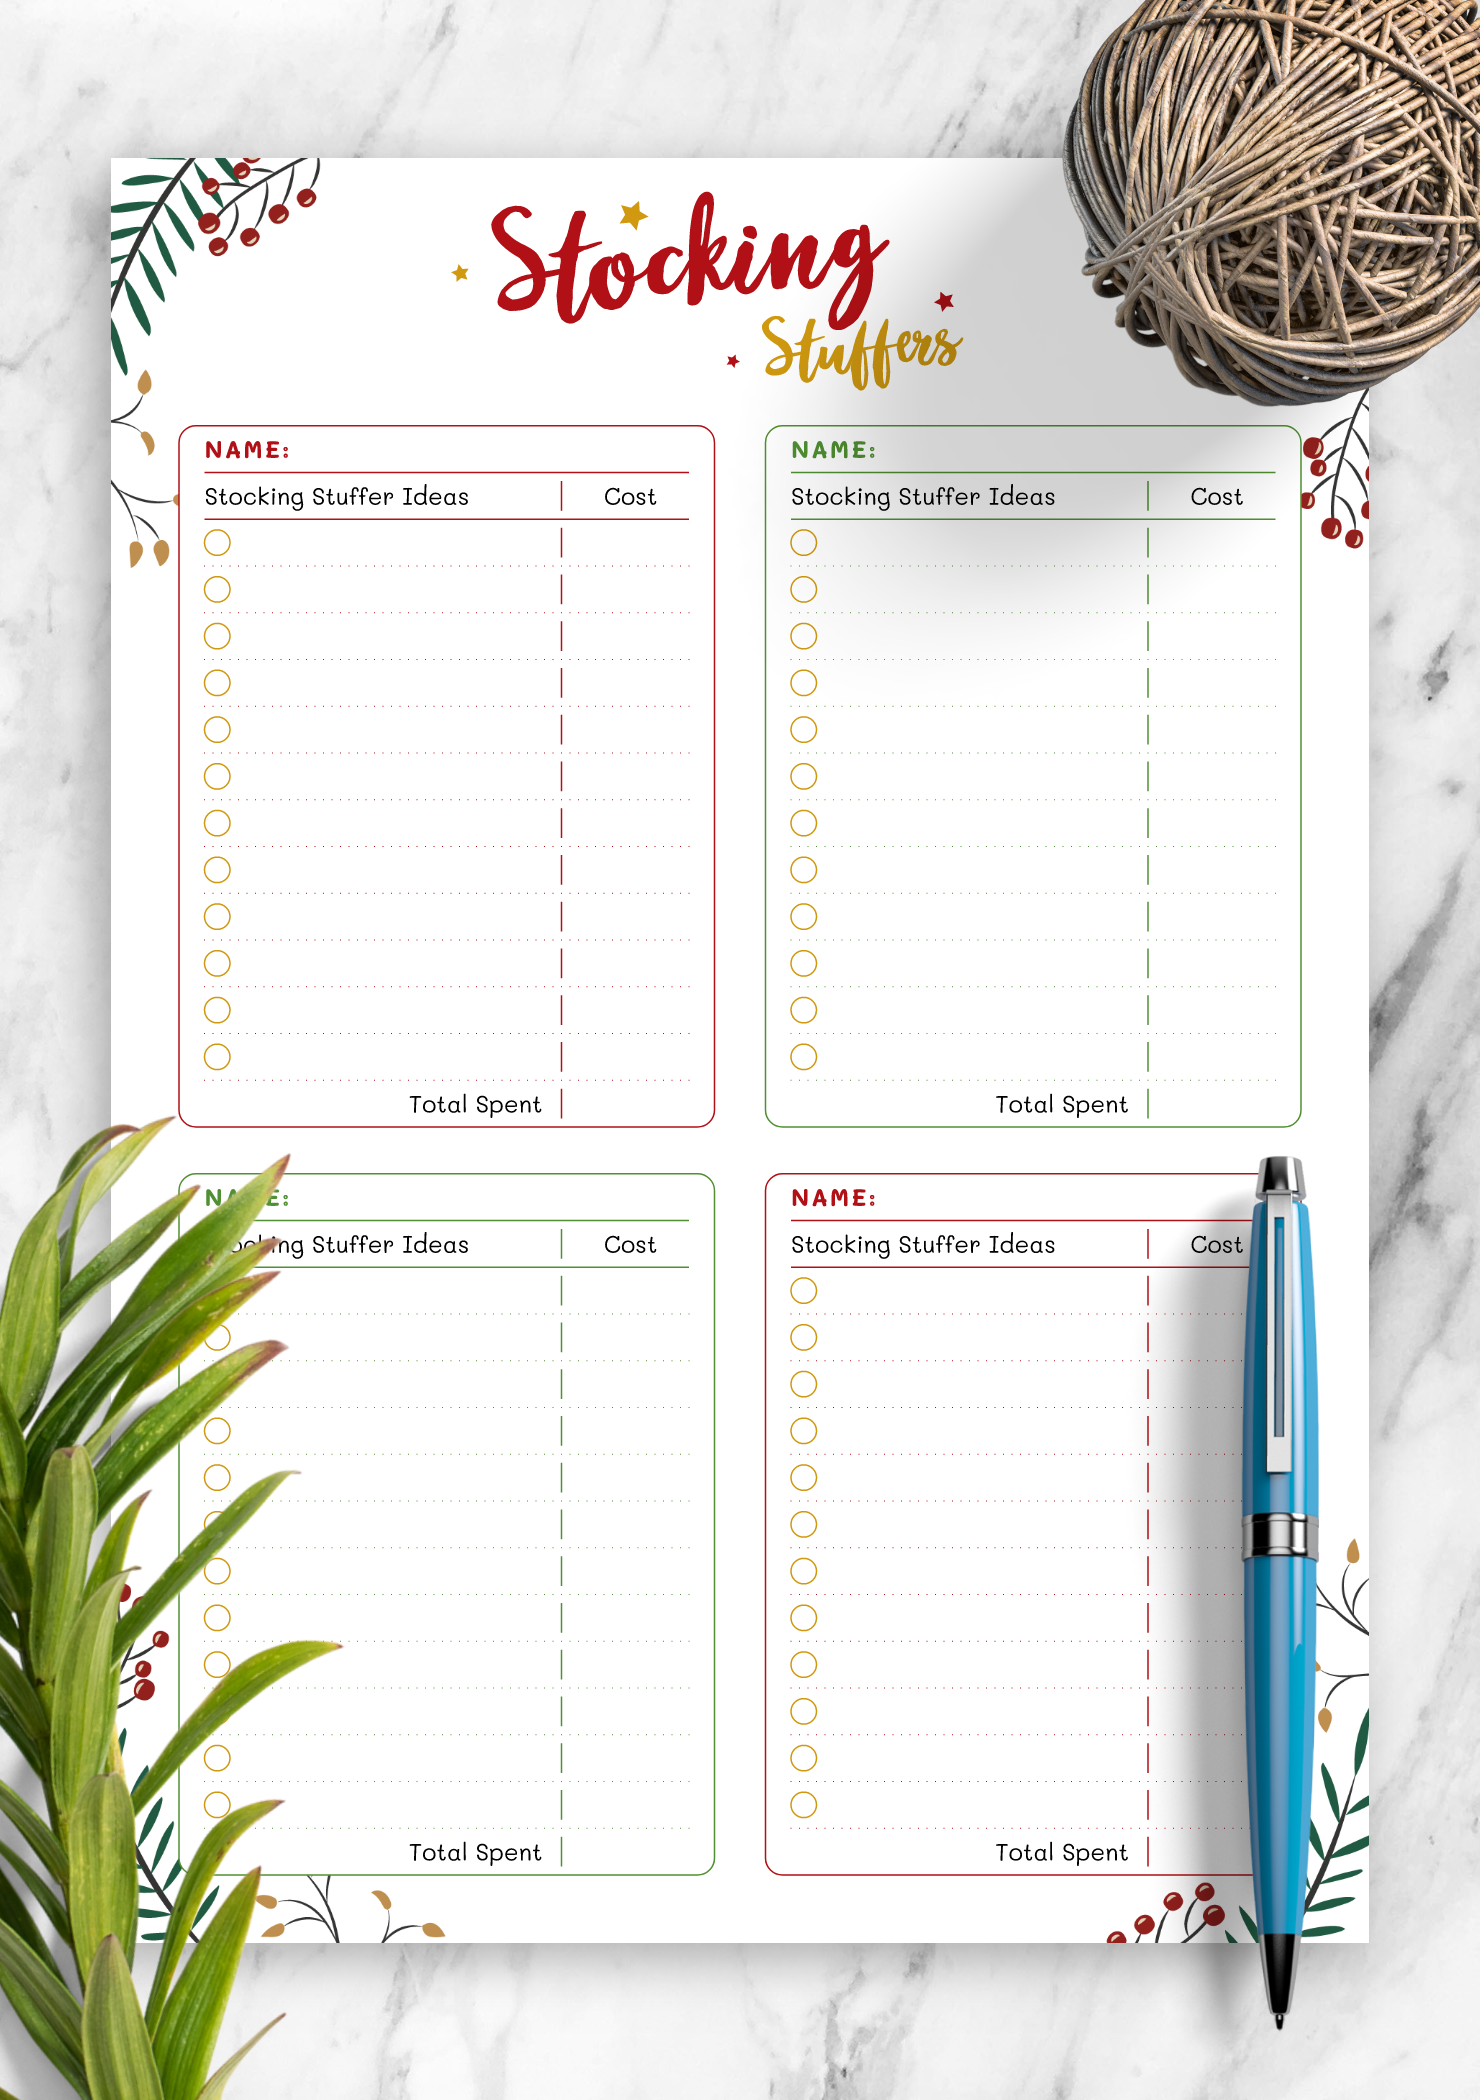 https://onplanners.com/sites/default/files/styles/template_fancy/public/template-images/printable-christmas-style-stocking-stuffers-template.png